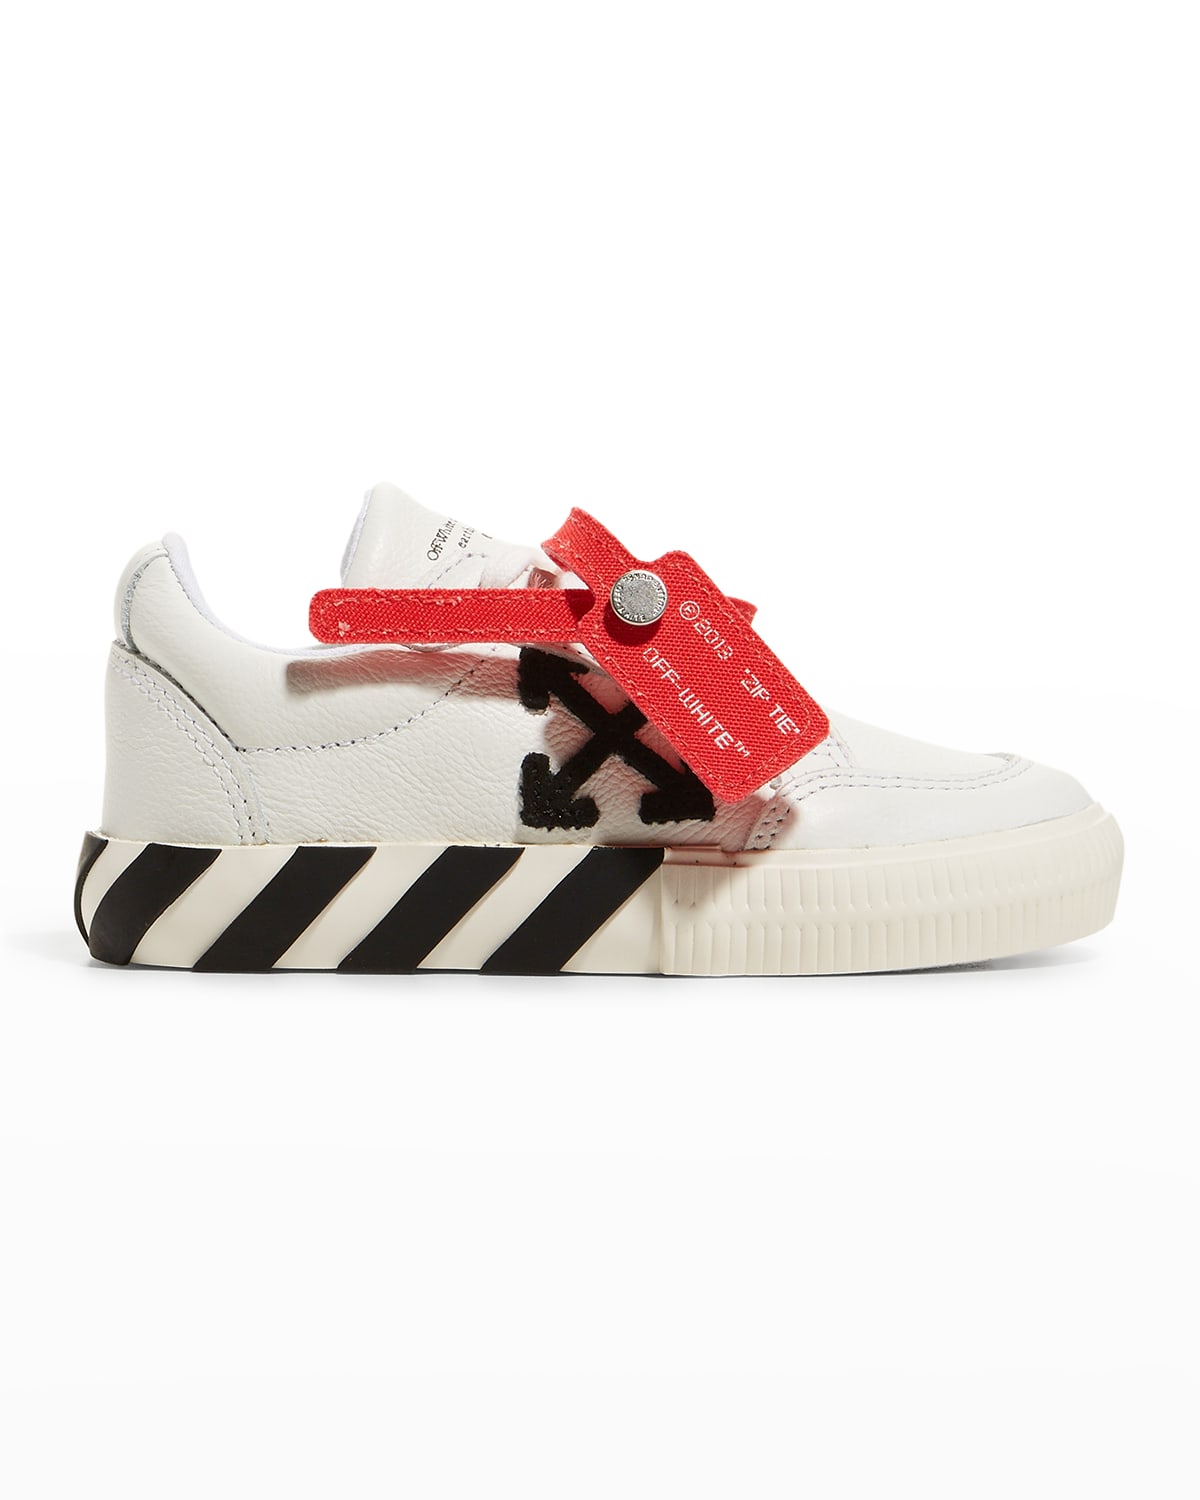 OFF-WHITE KID'S ARROW LEATHER GRIP-STRAP LOW-TOP SNEAKERS, TODDLER/KIDS